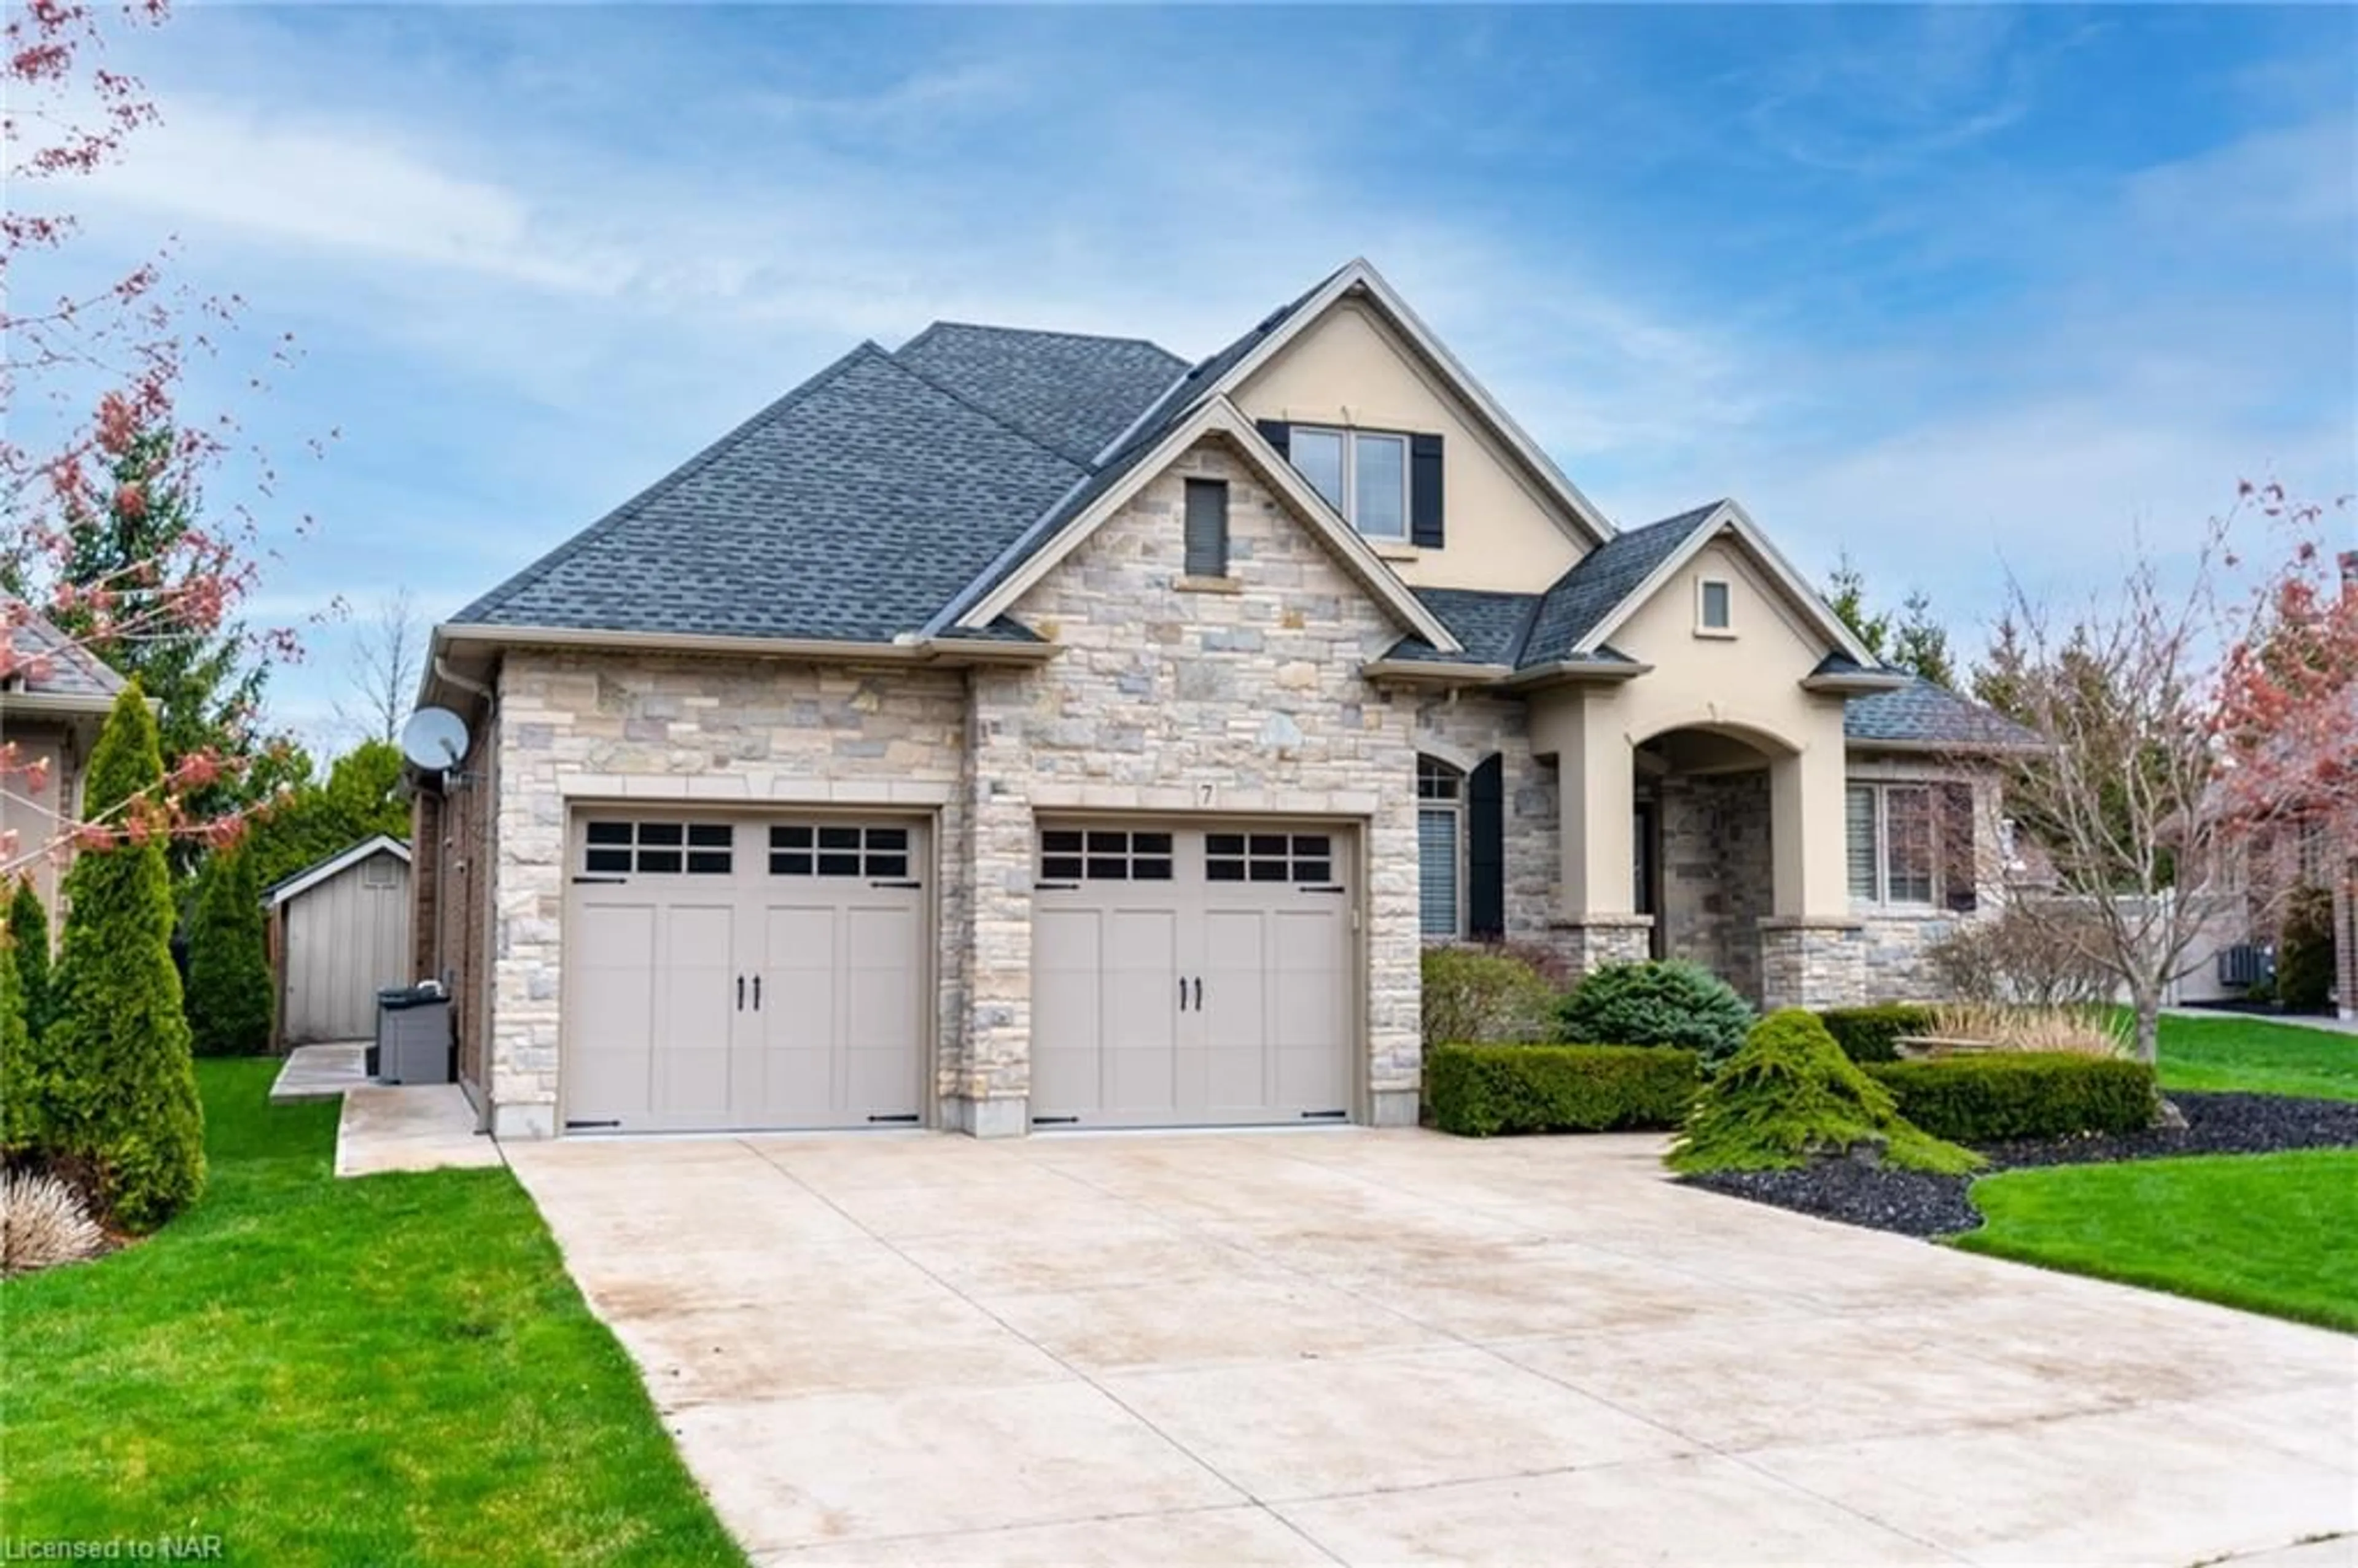 Home with brick exterior material for 7 Brondi's Lane, Fonthill Ontario L0S 1E5